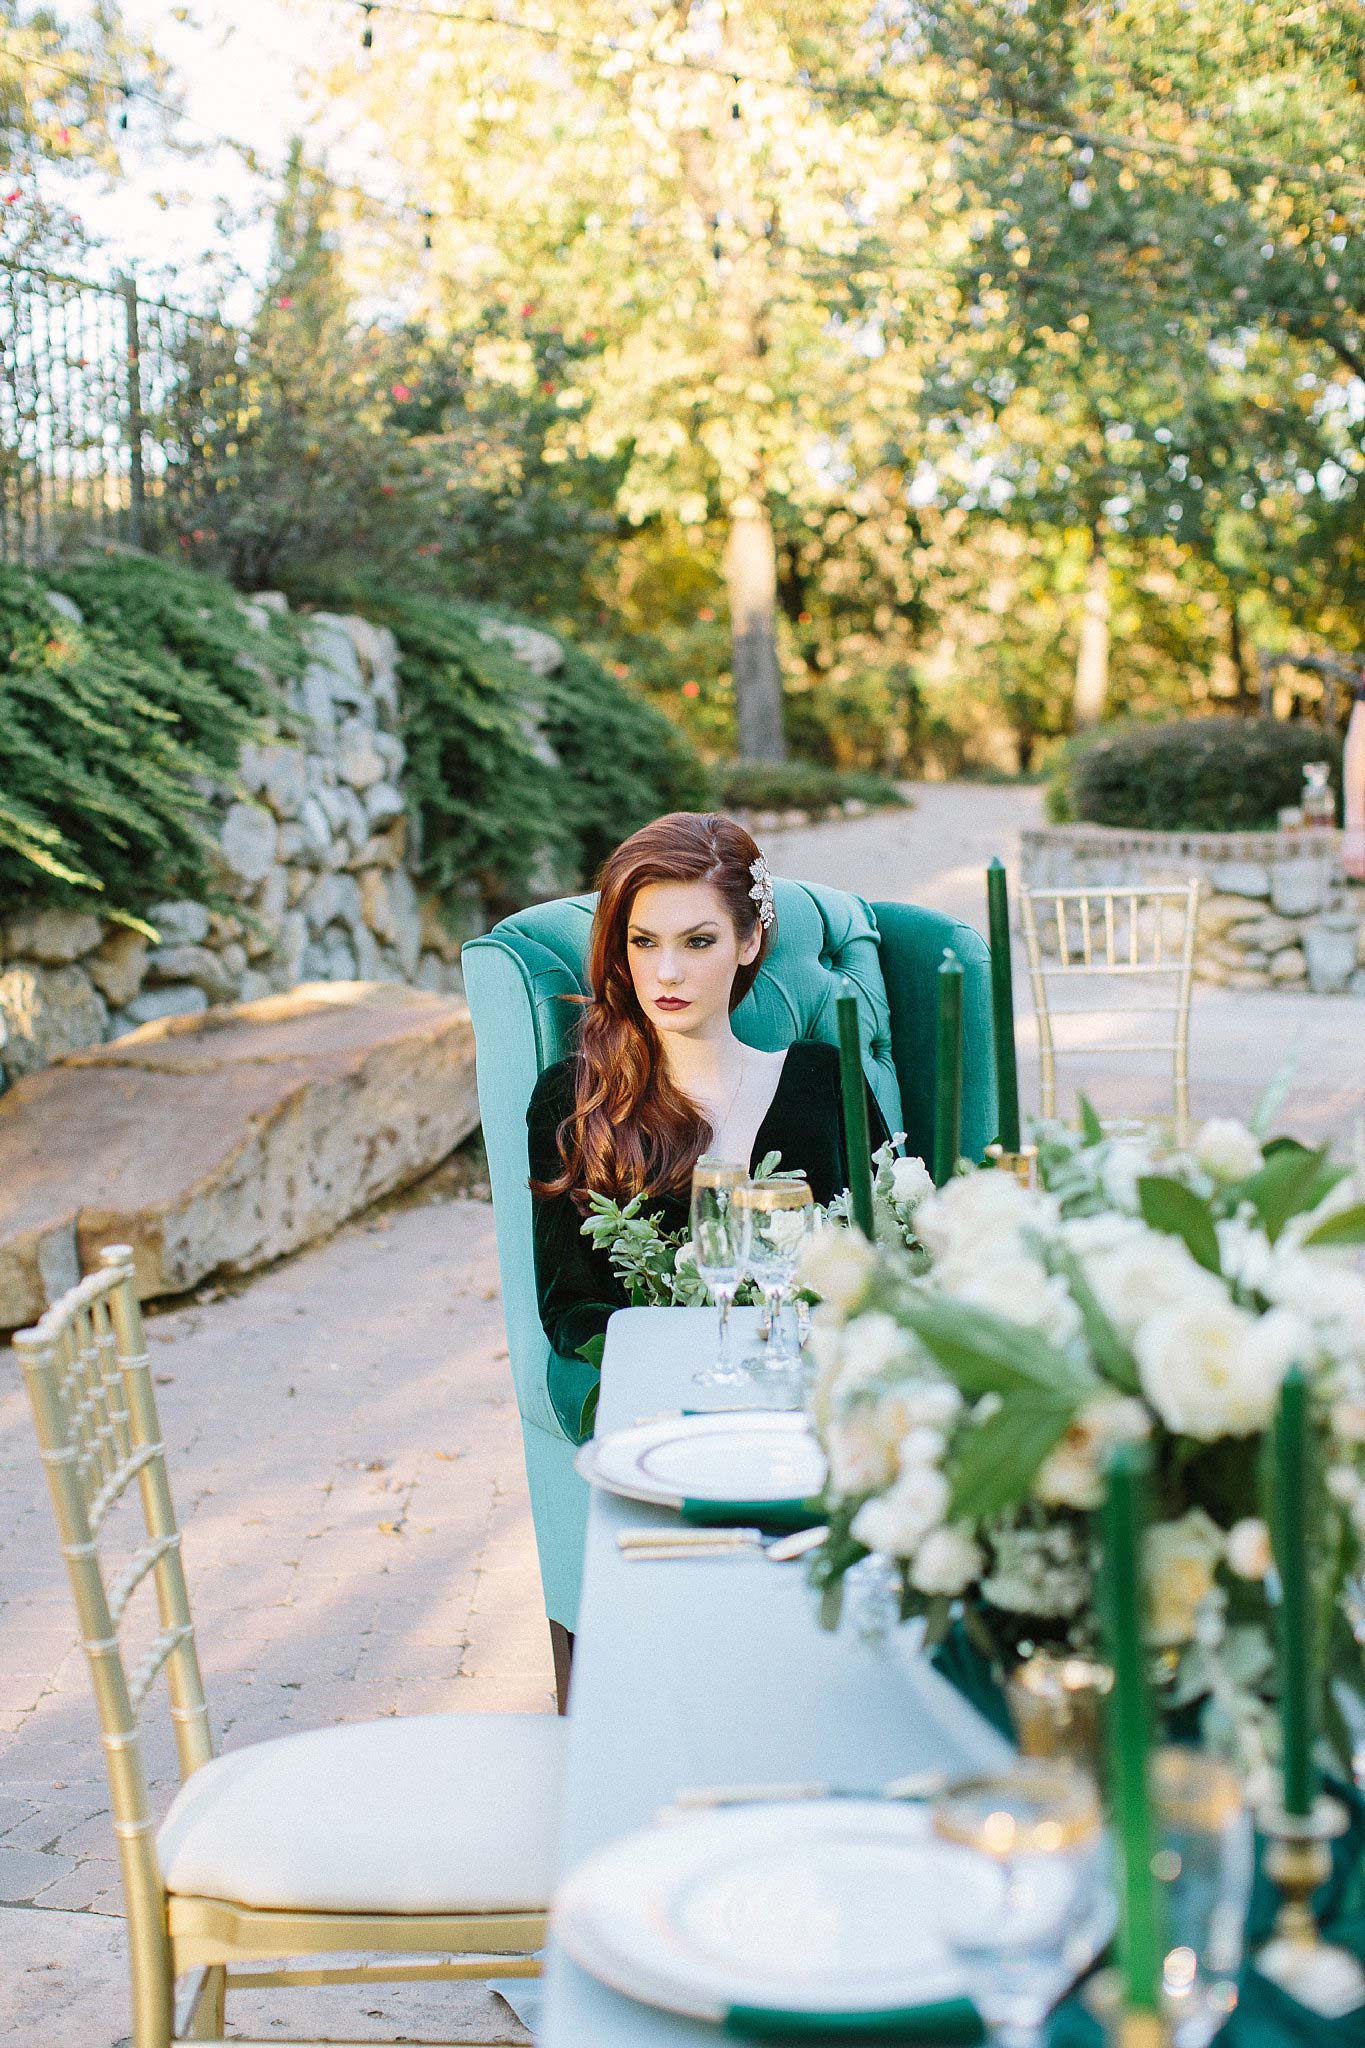 aristide mansfield wedding bride with red hair sitting at the end of the table